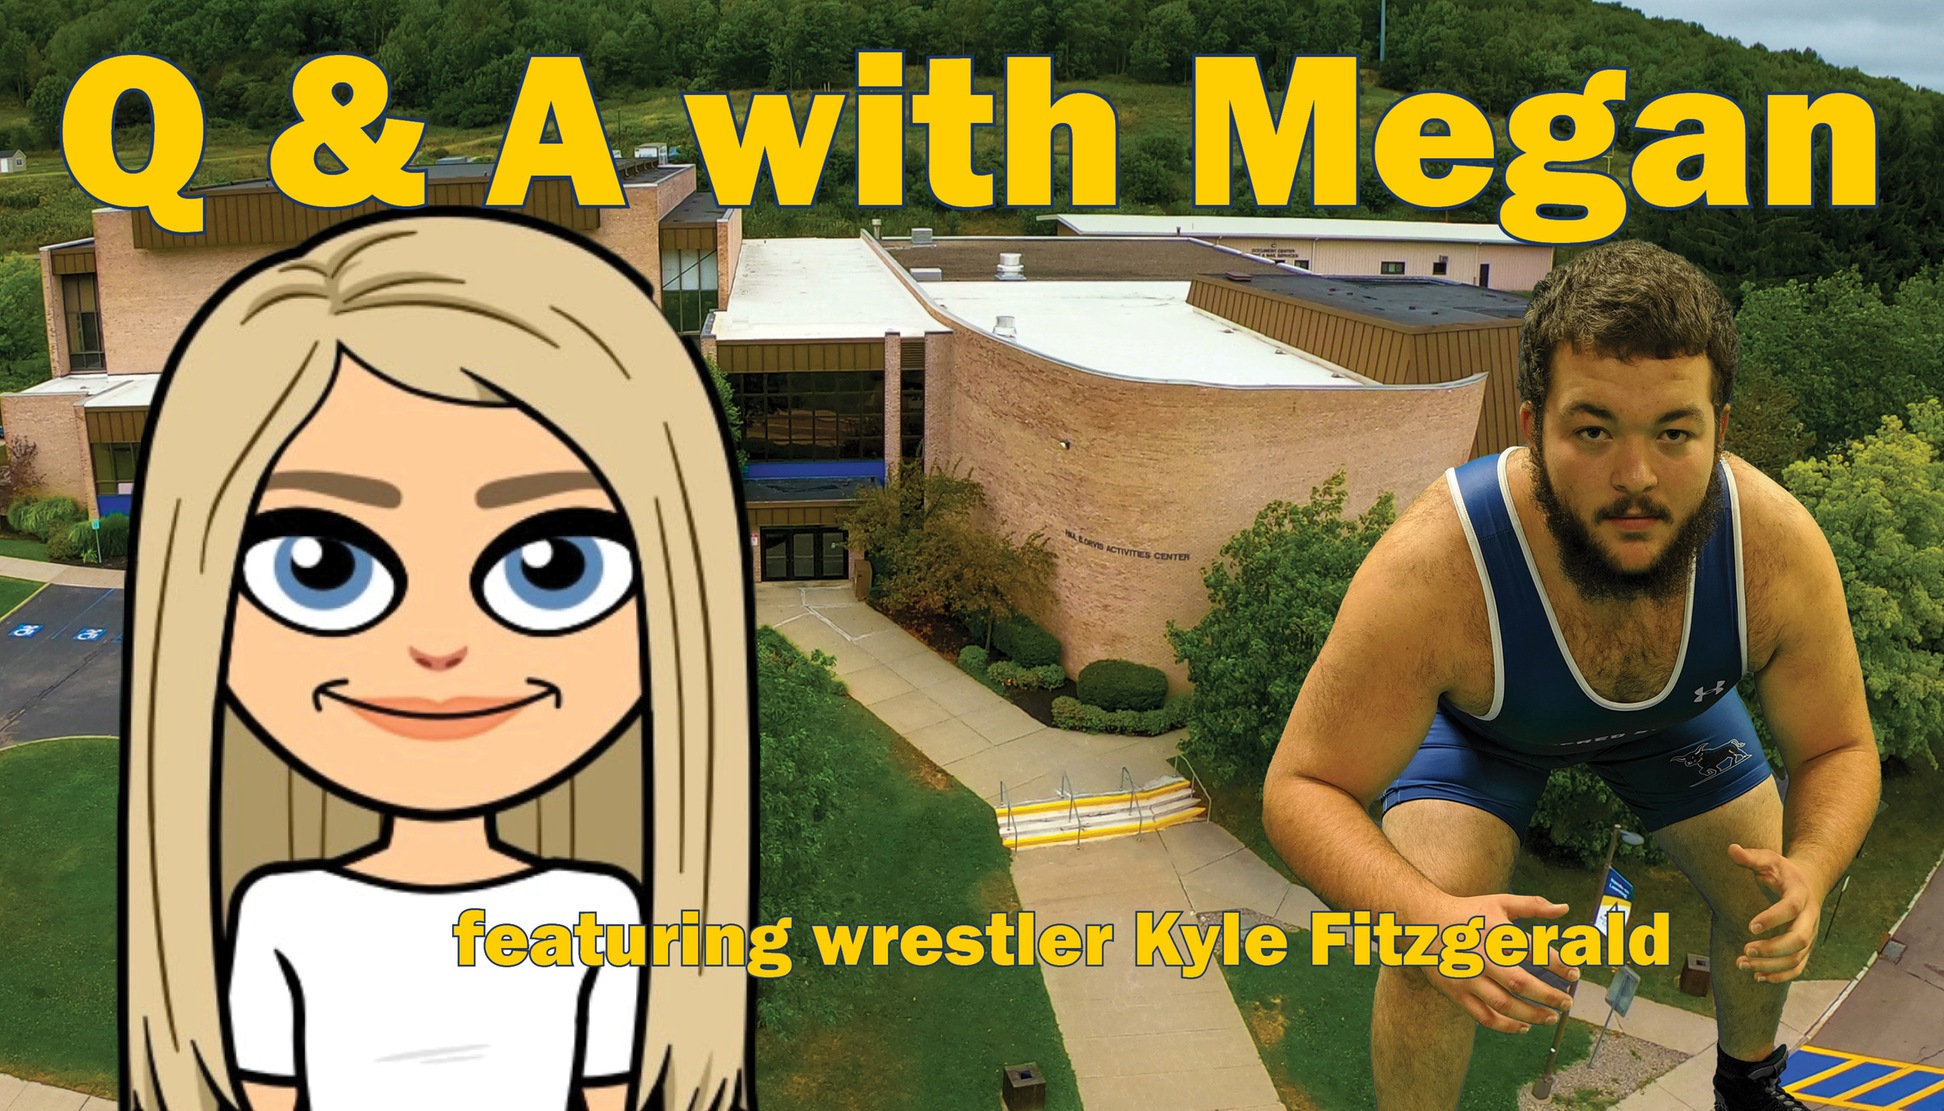 Q & A with Megan - featuring wrestler Kyle Fitzgerald